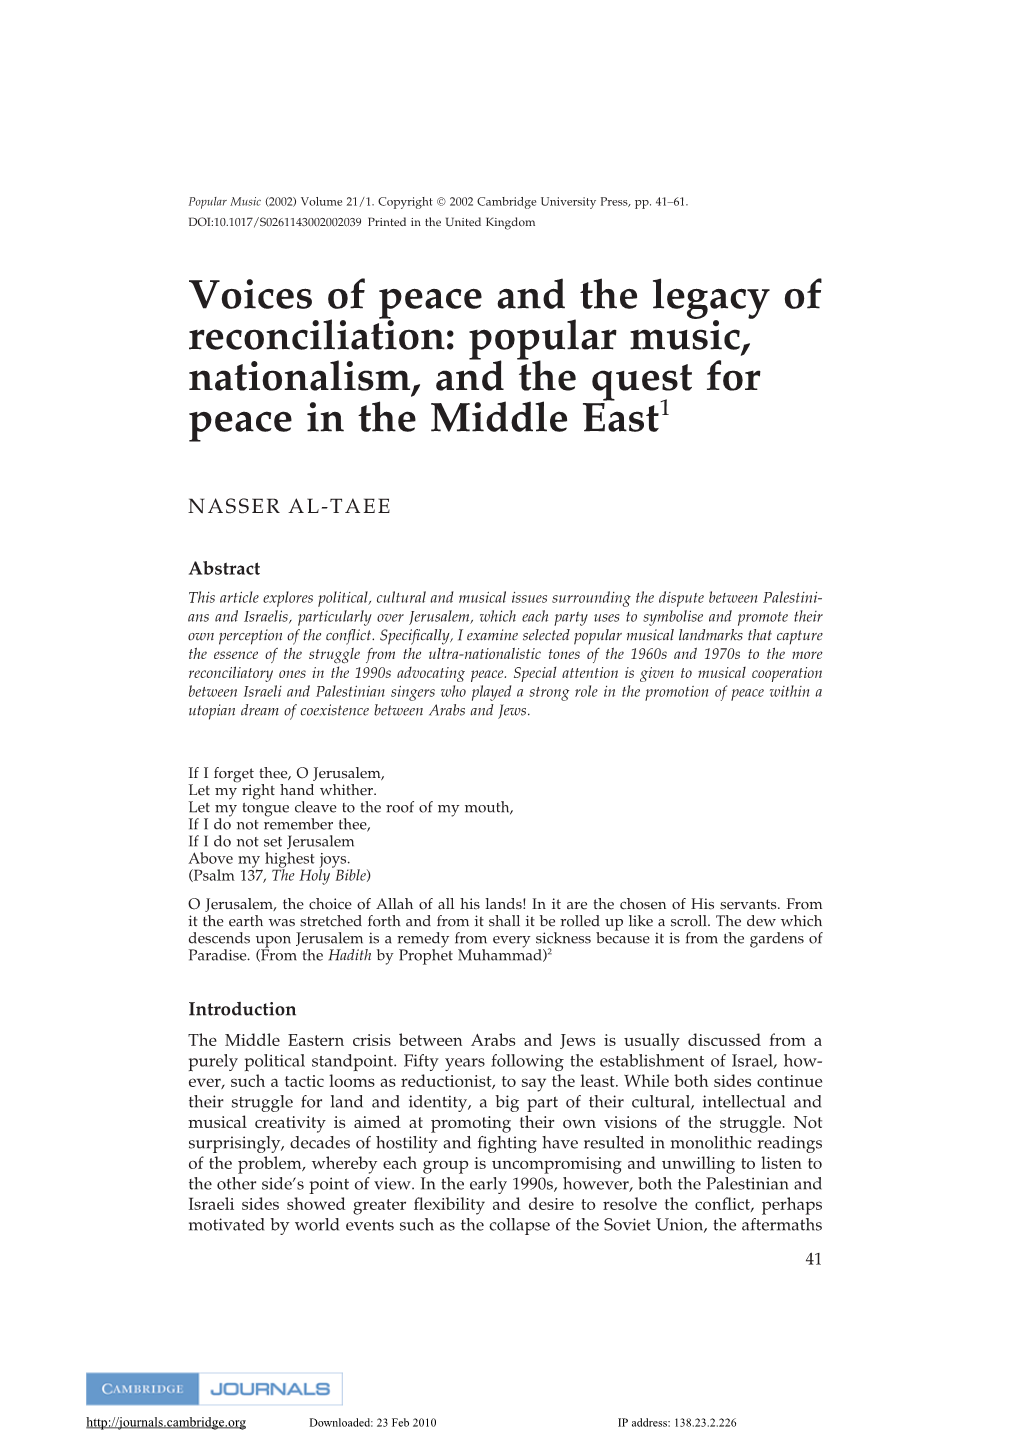 Voices of Peace and the Legacy of Reconciliation: Popular Music, Nationalism, and the Quest for Peace in the Middle East1